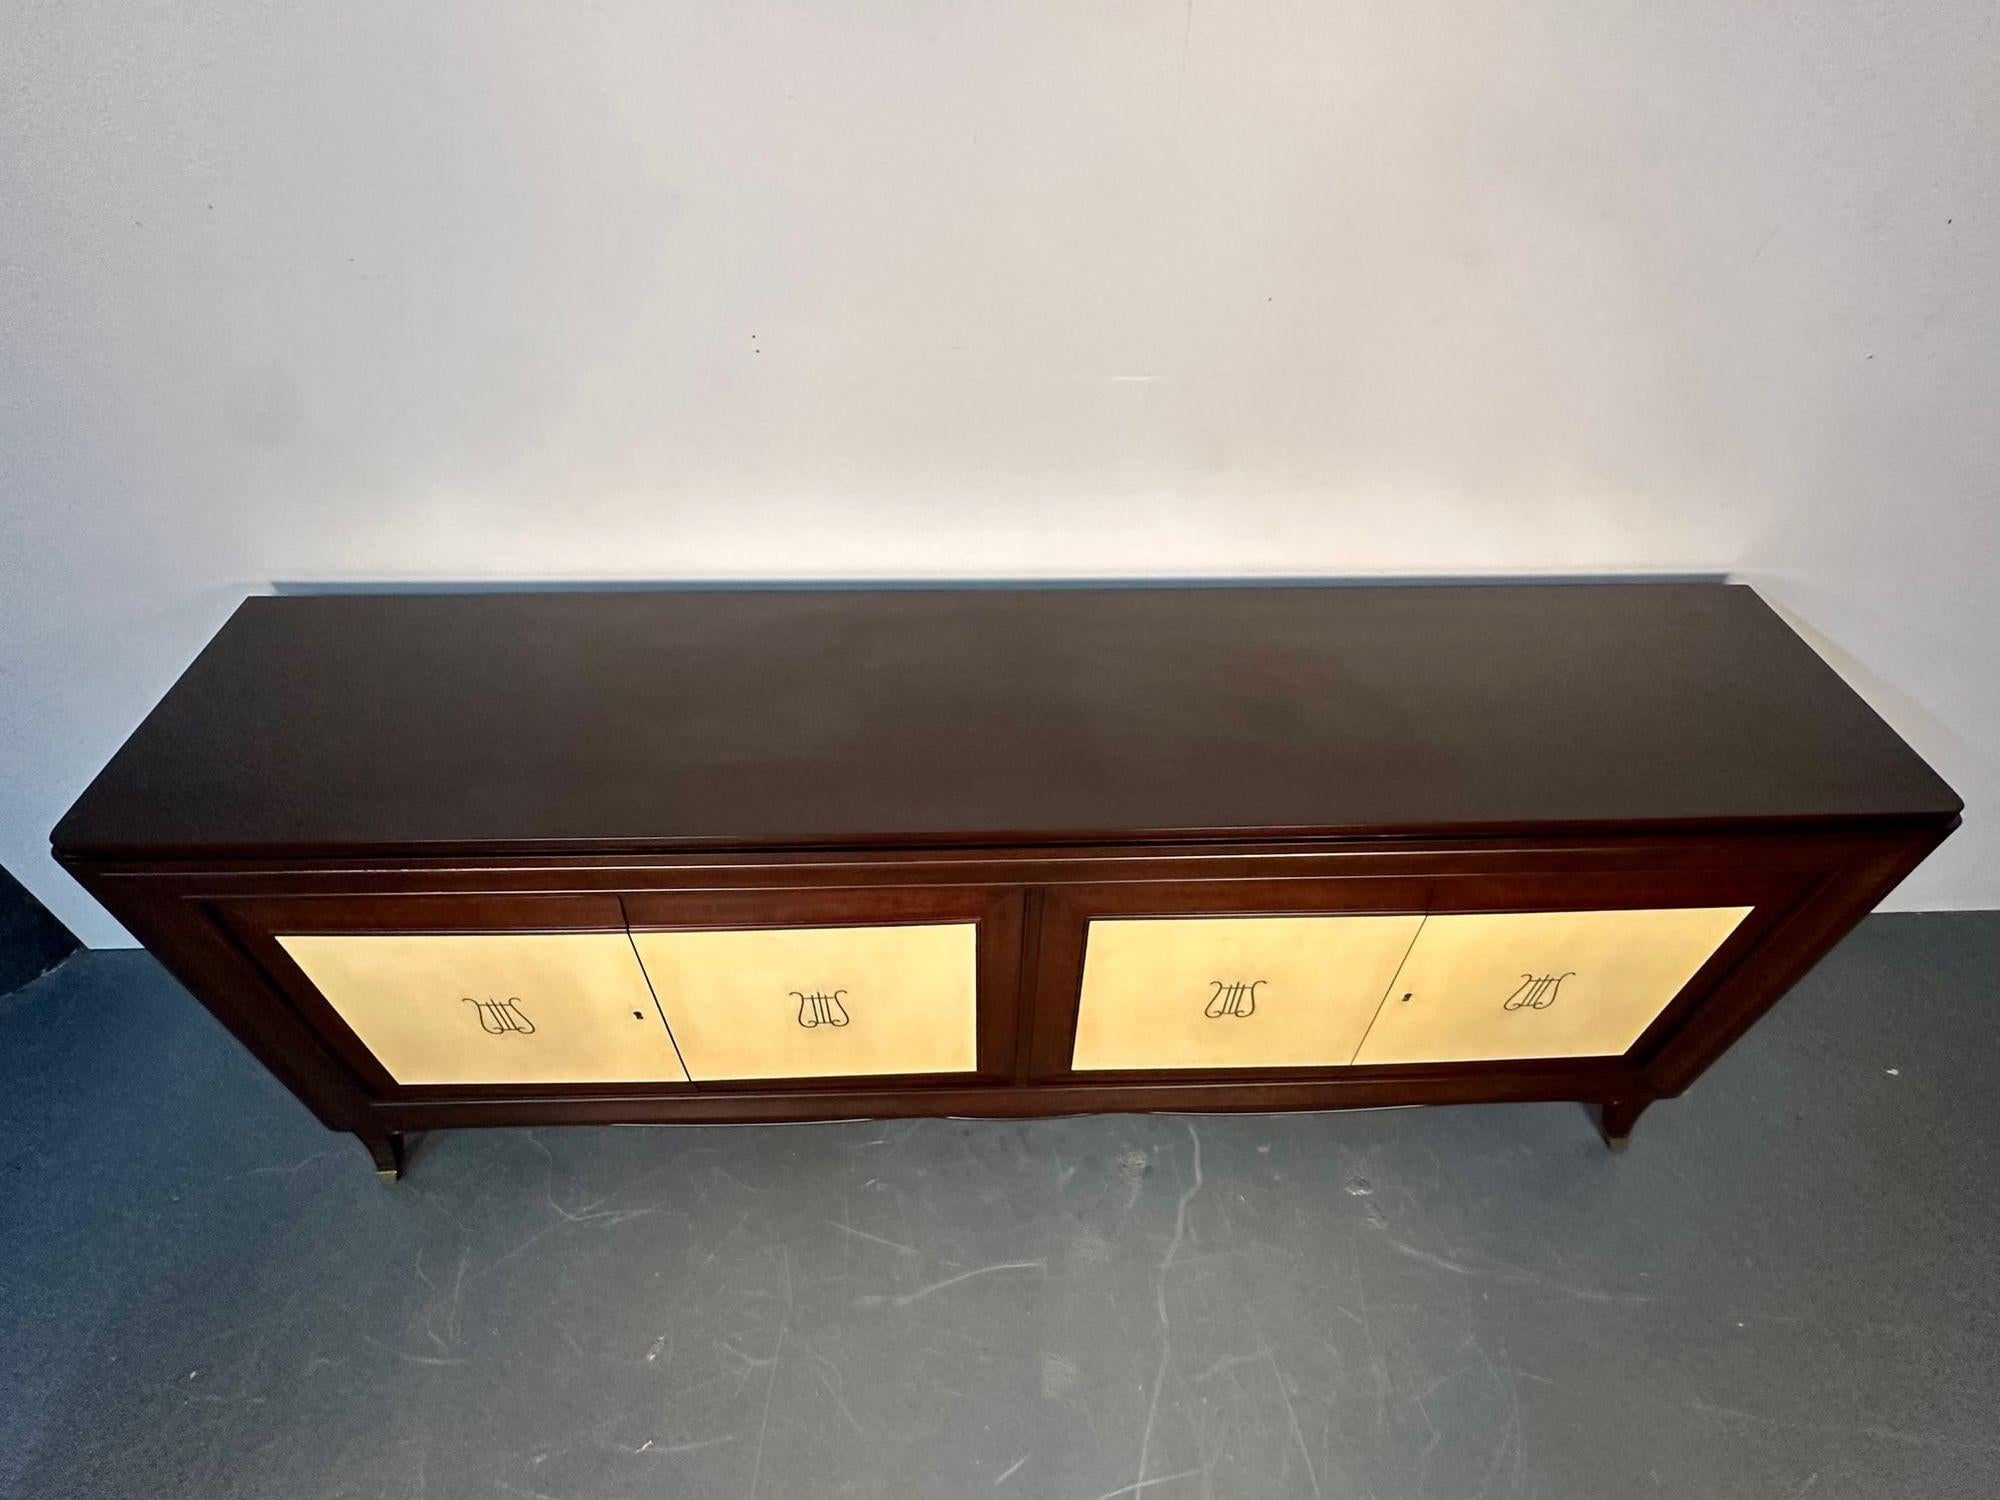 Italian Midcentury Sideboard / Credenza / Cabinet, Parchment, Mahogany, 1950s For Sale 3